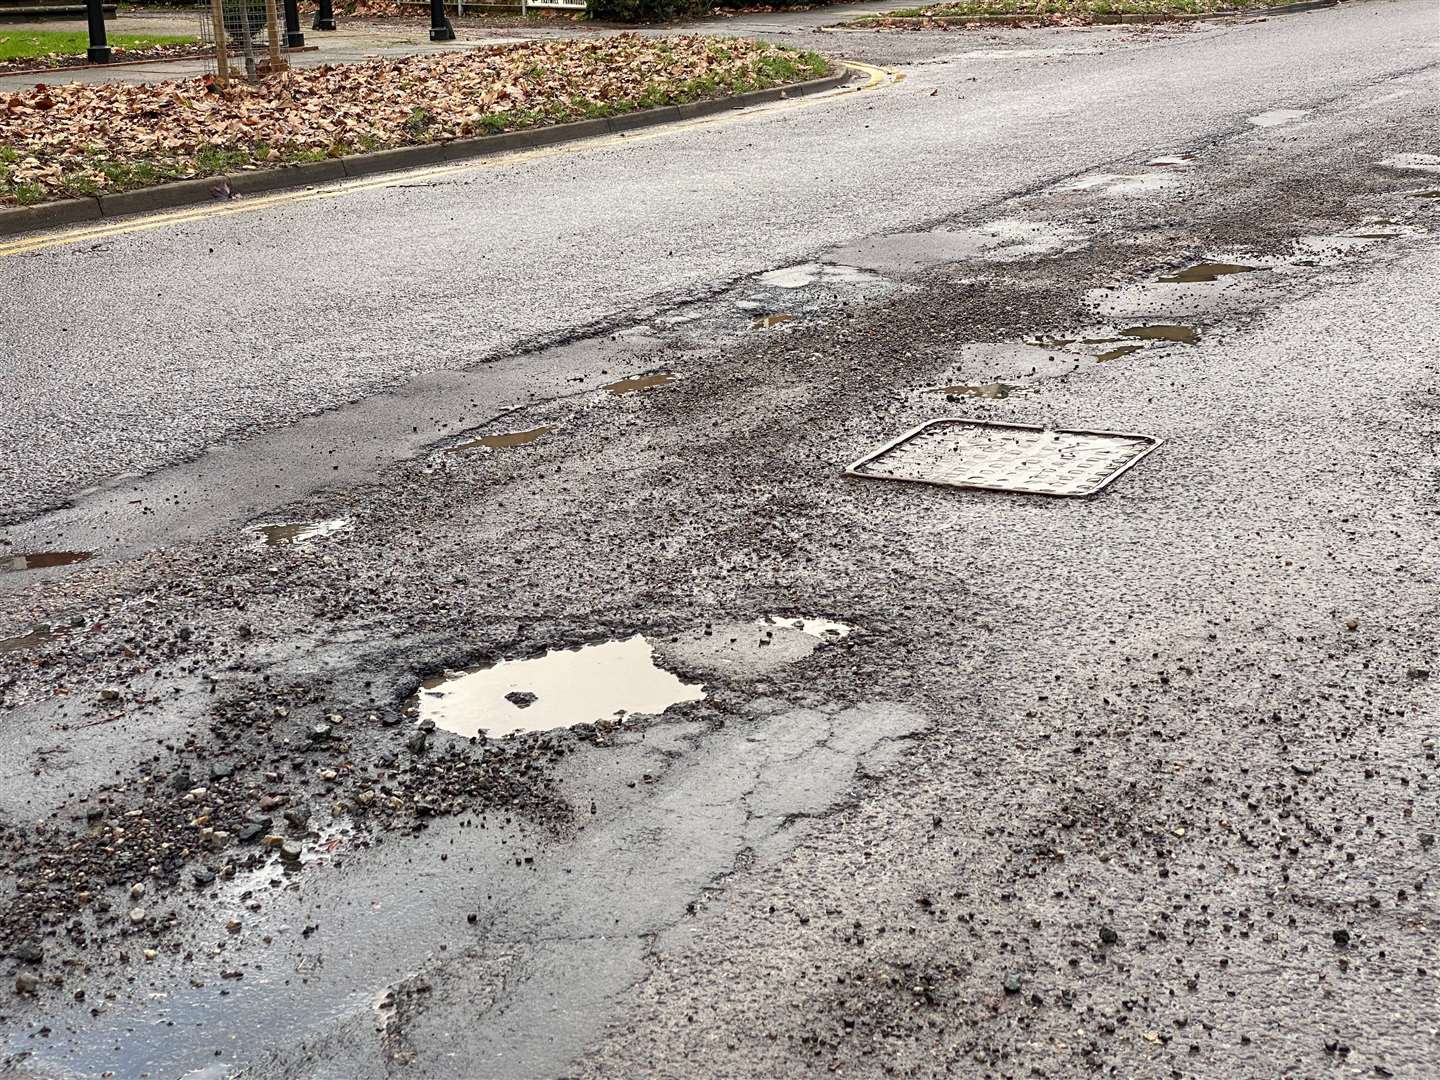 The potholes are filling up with water. Photo: Sue Ferguson